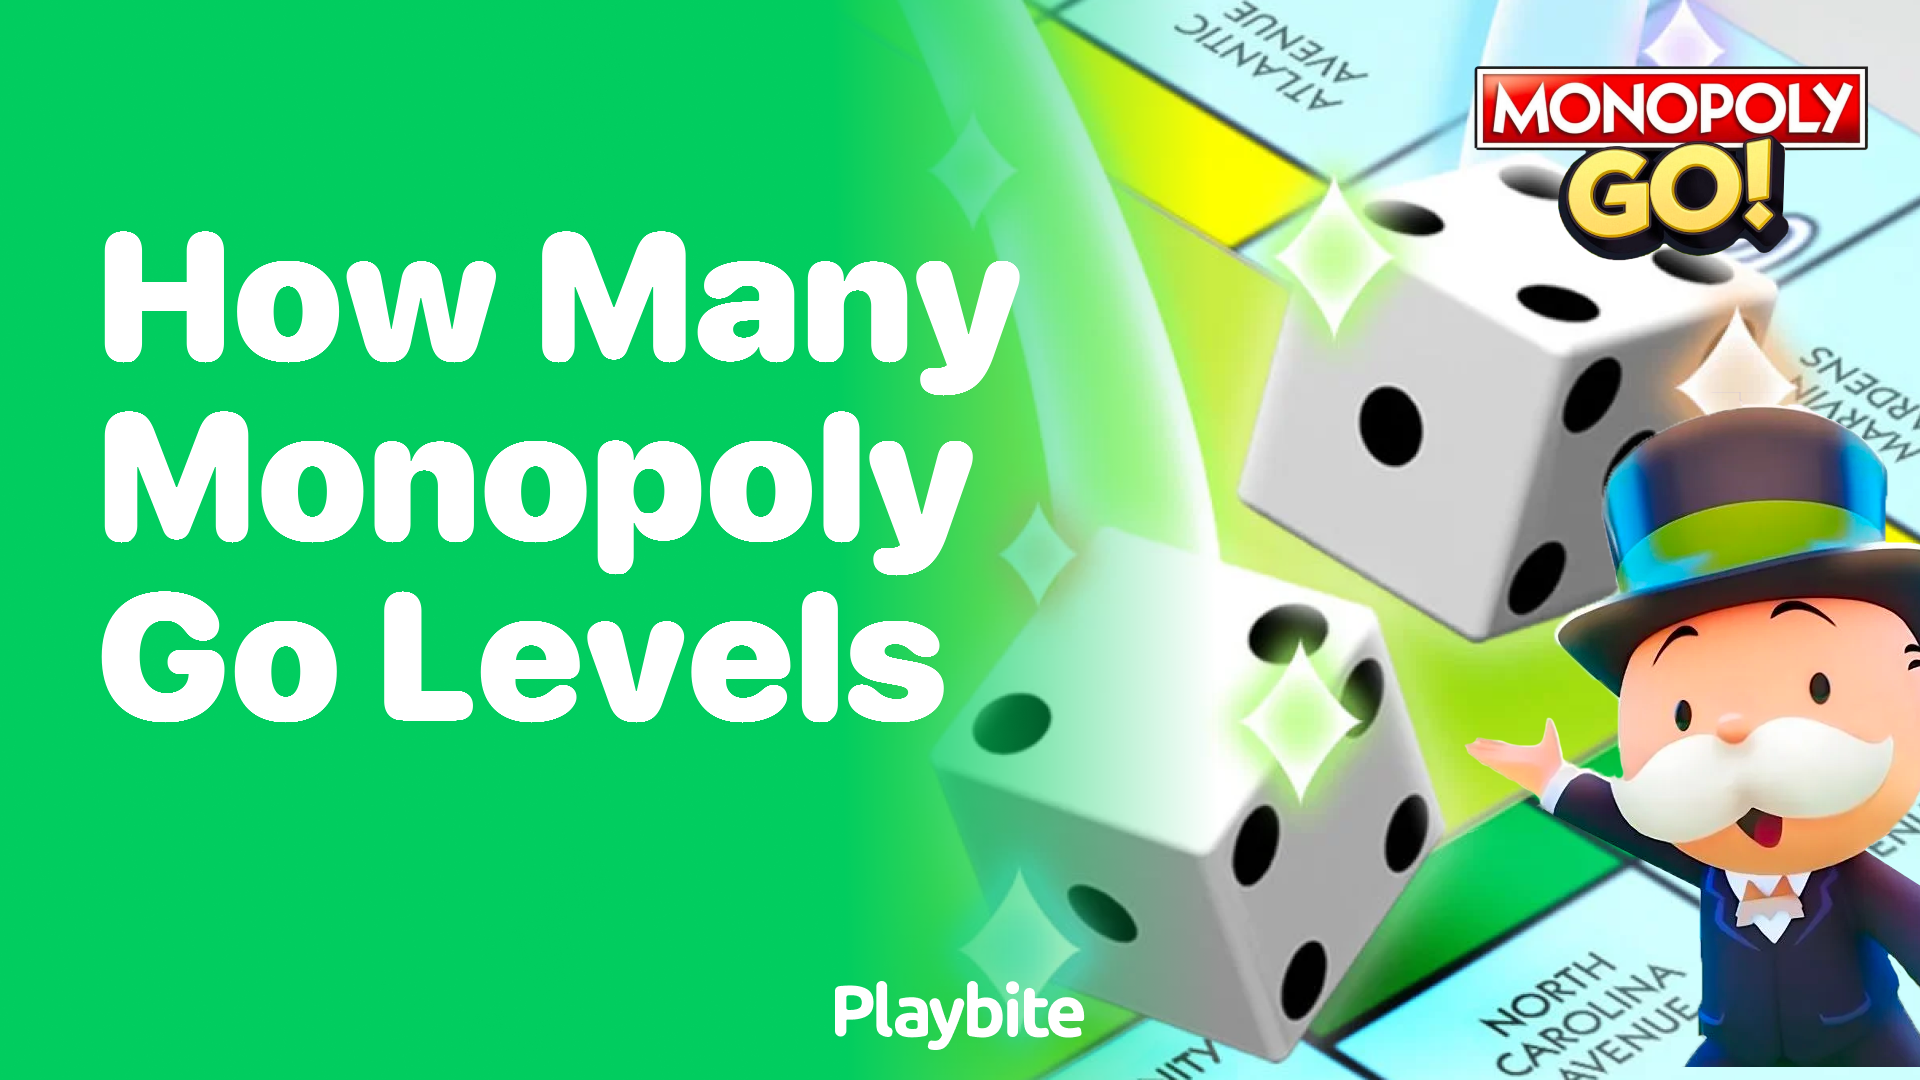 How Many Levels Are in Monopoly Go?